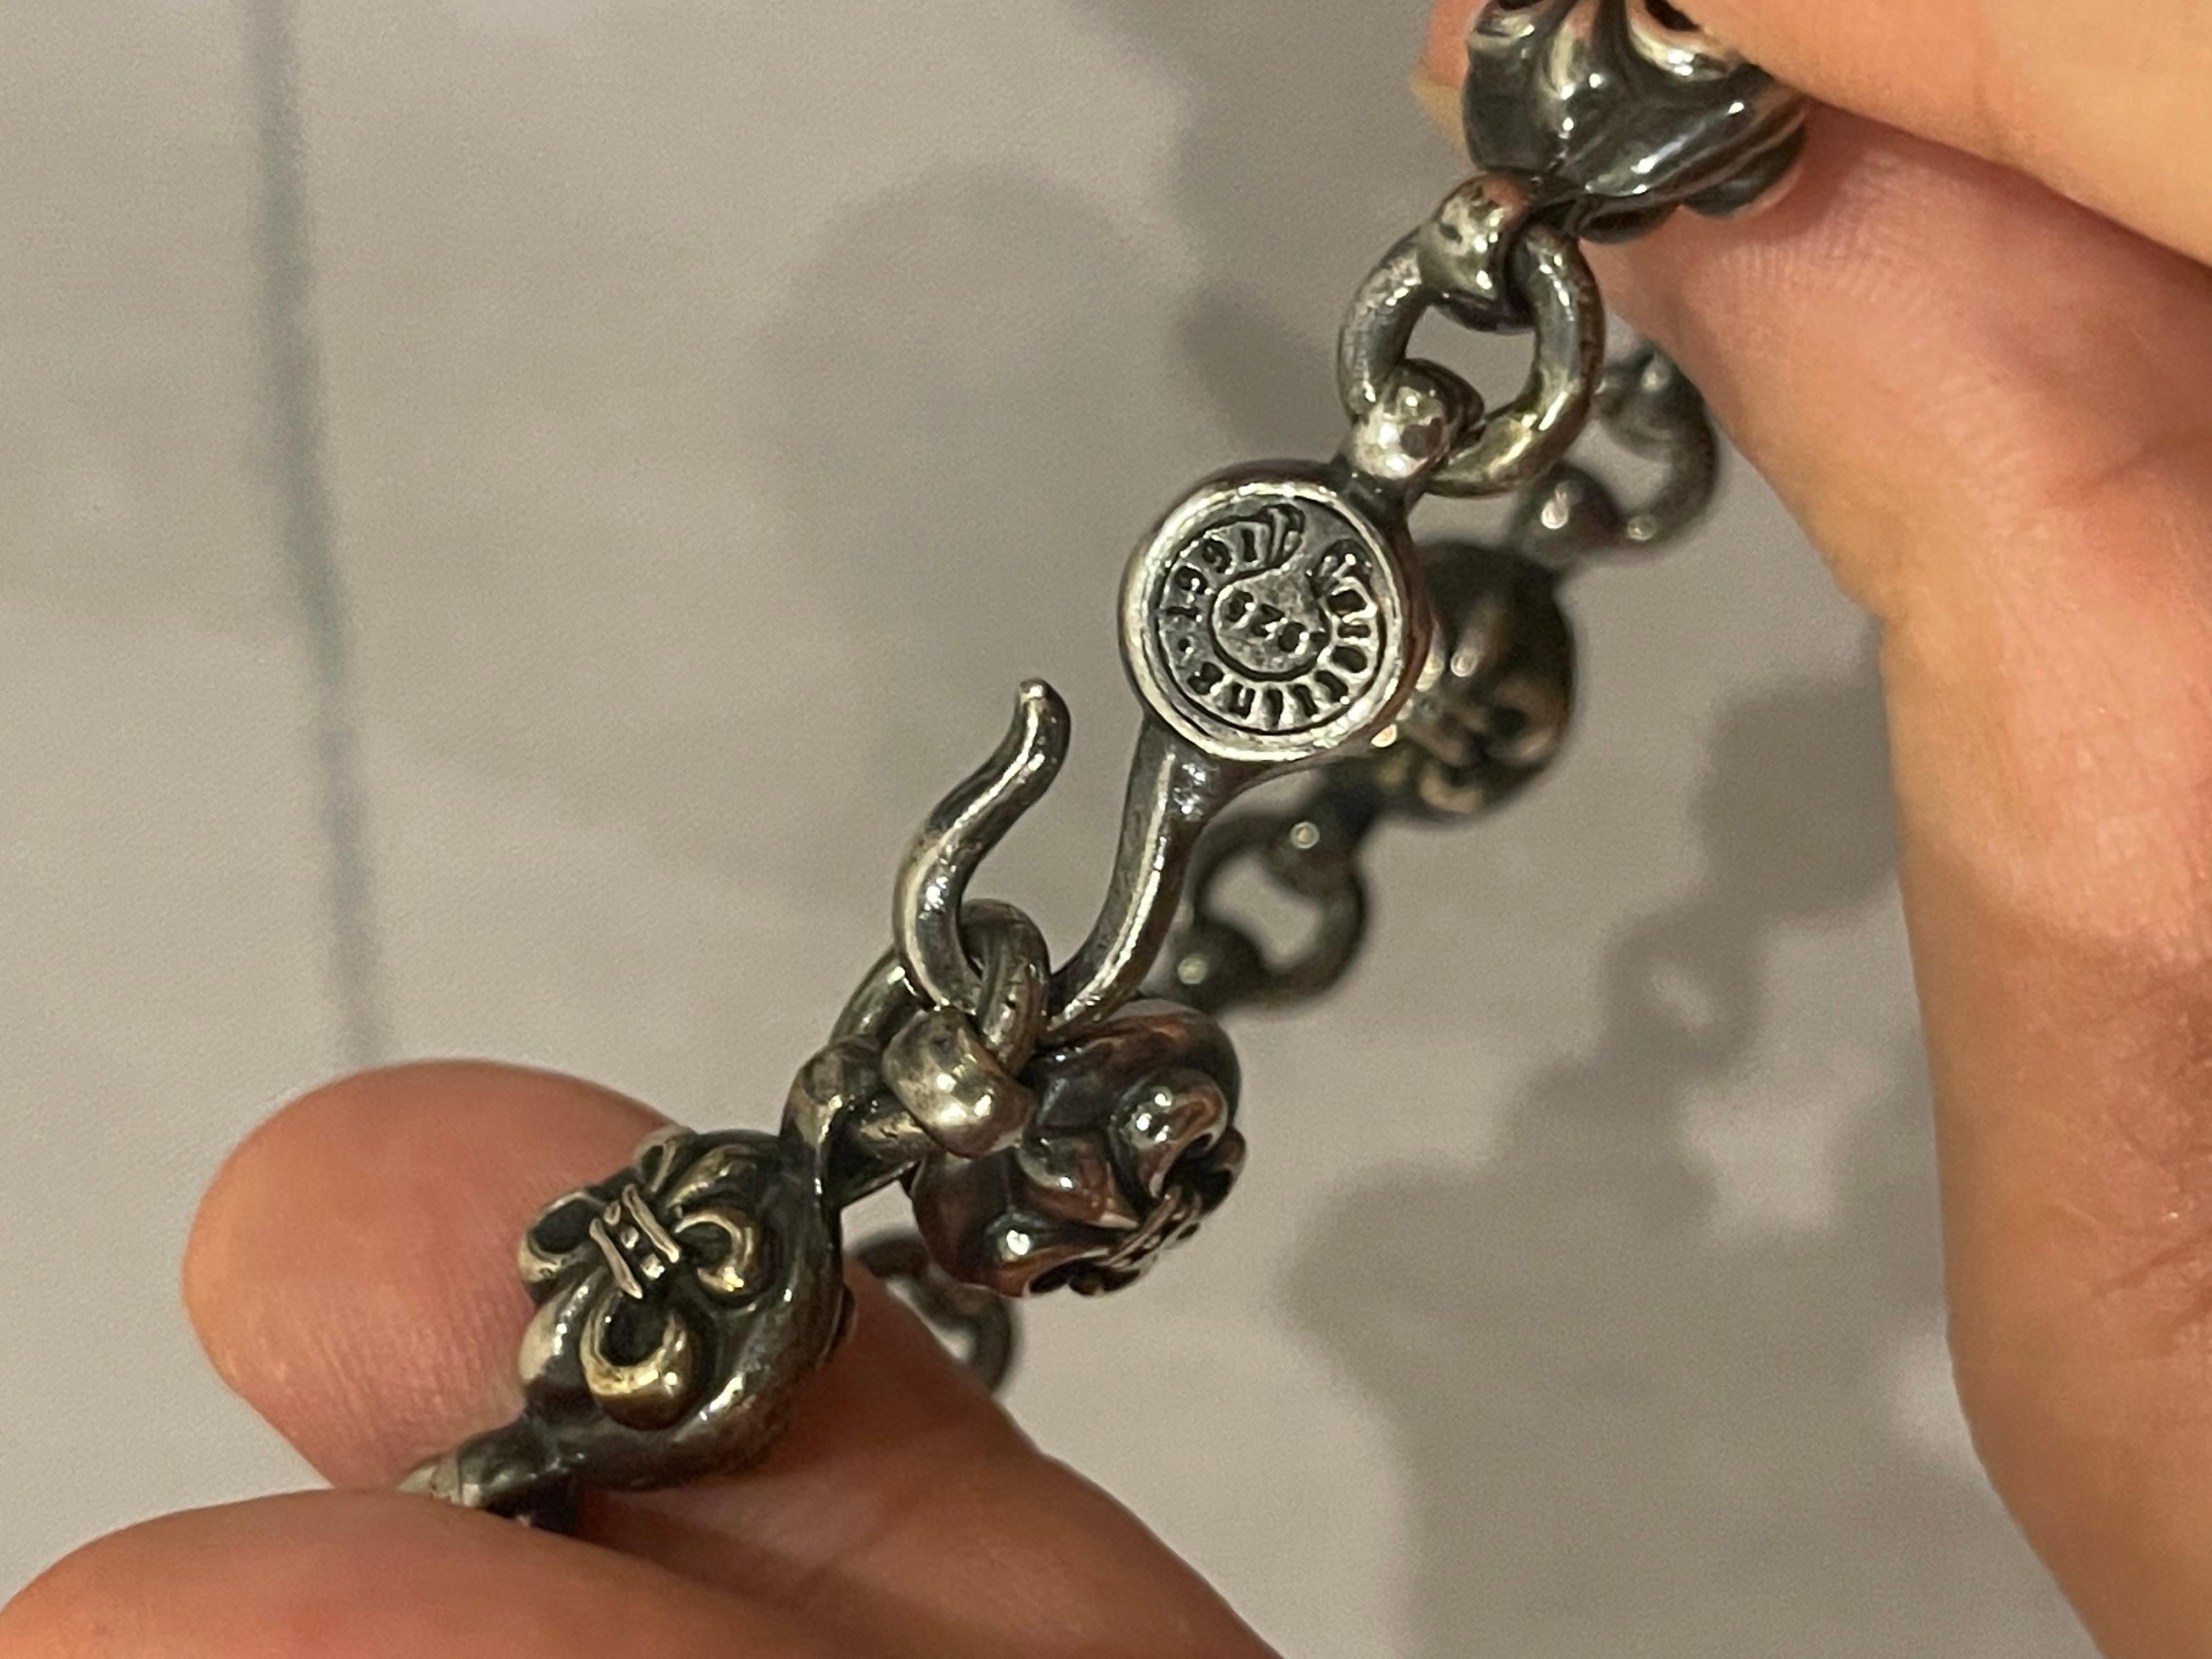 Rare sterling silver Chrome Hearts Pastilles Chain Bracelet. Beautiful condition, only mild oxidation thats cleanable. Adjustable size according to the chain loop. Classic chrome hearts piece. Comes as it is. 